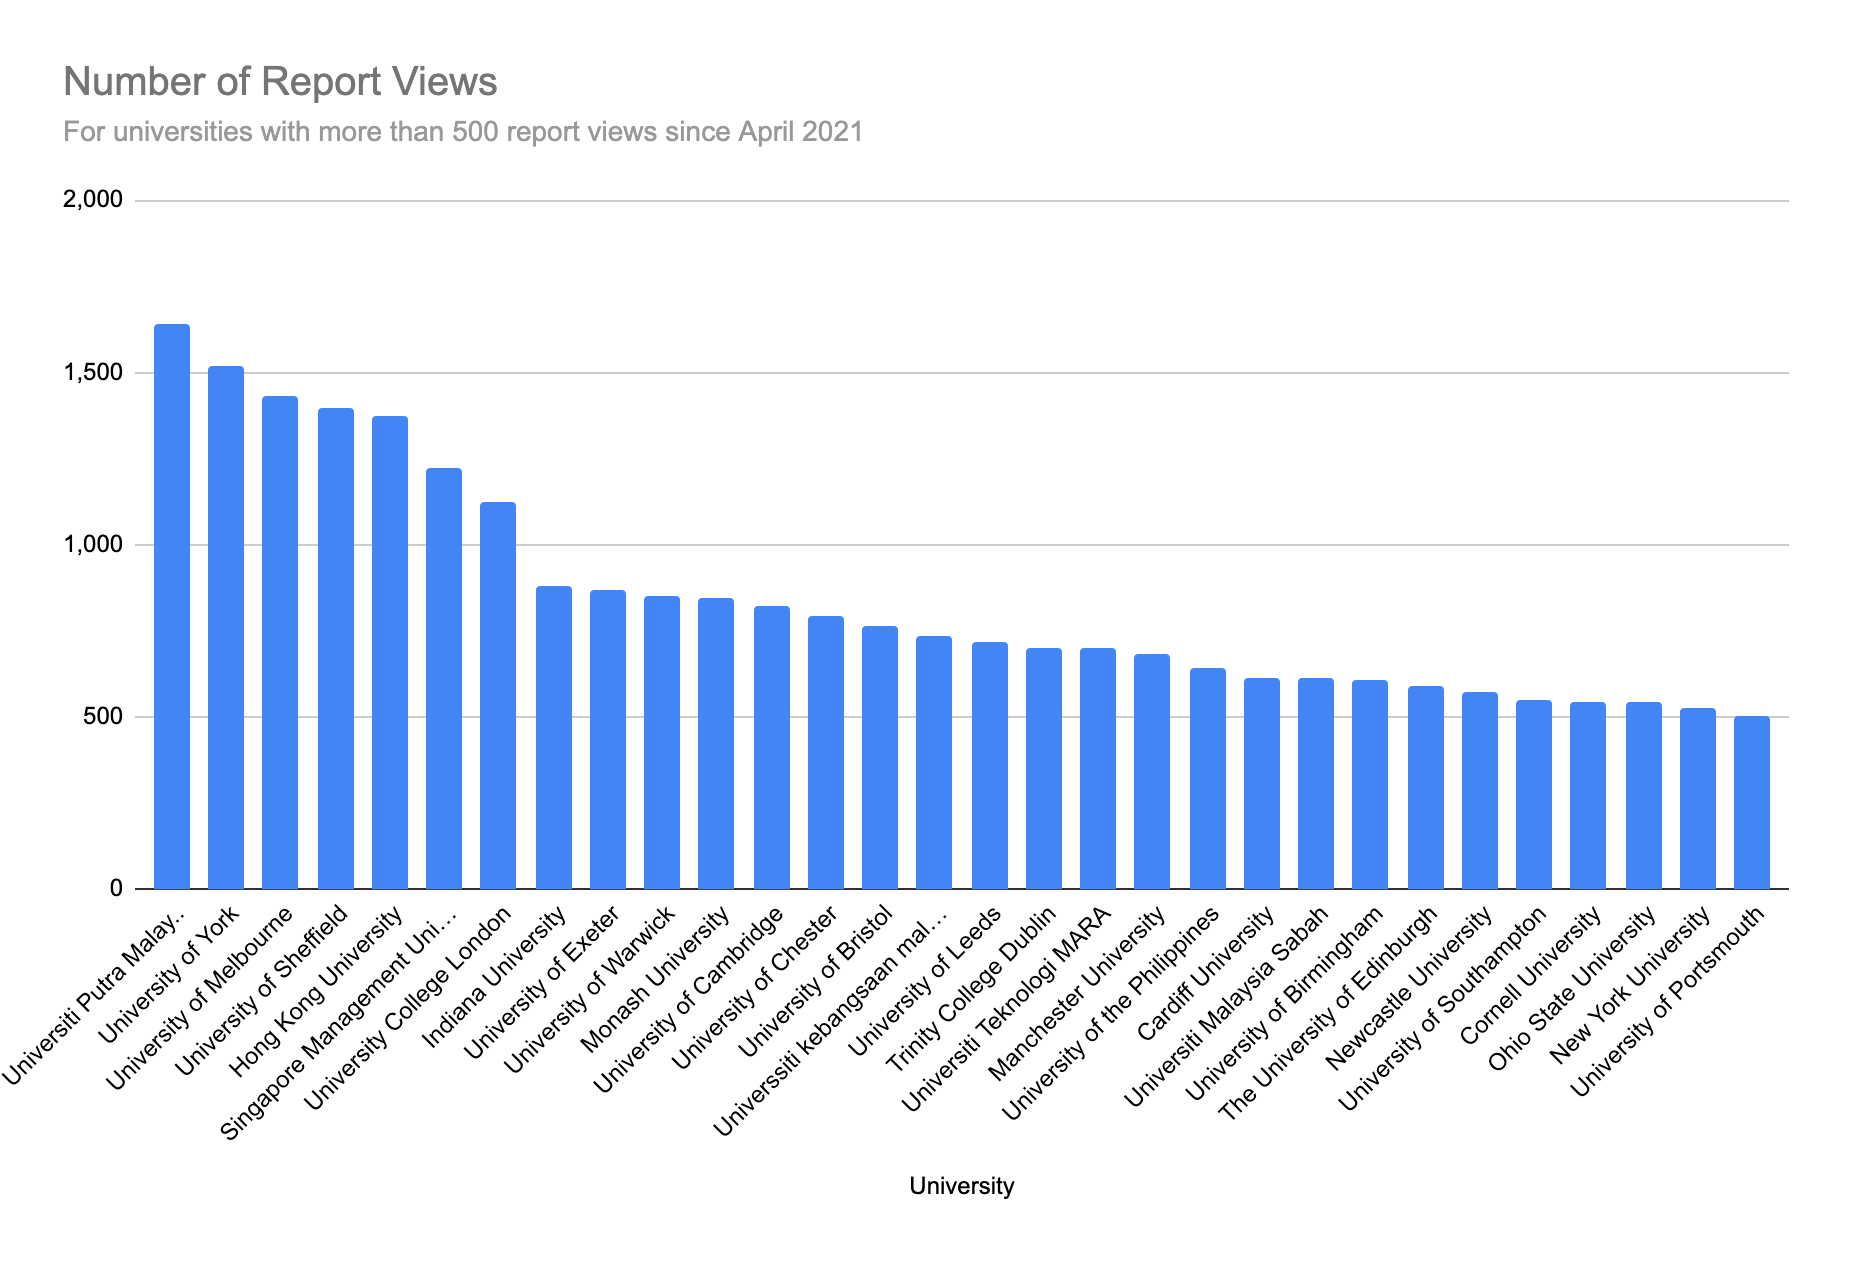 Number of report views